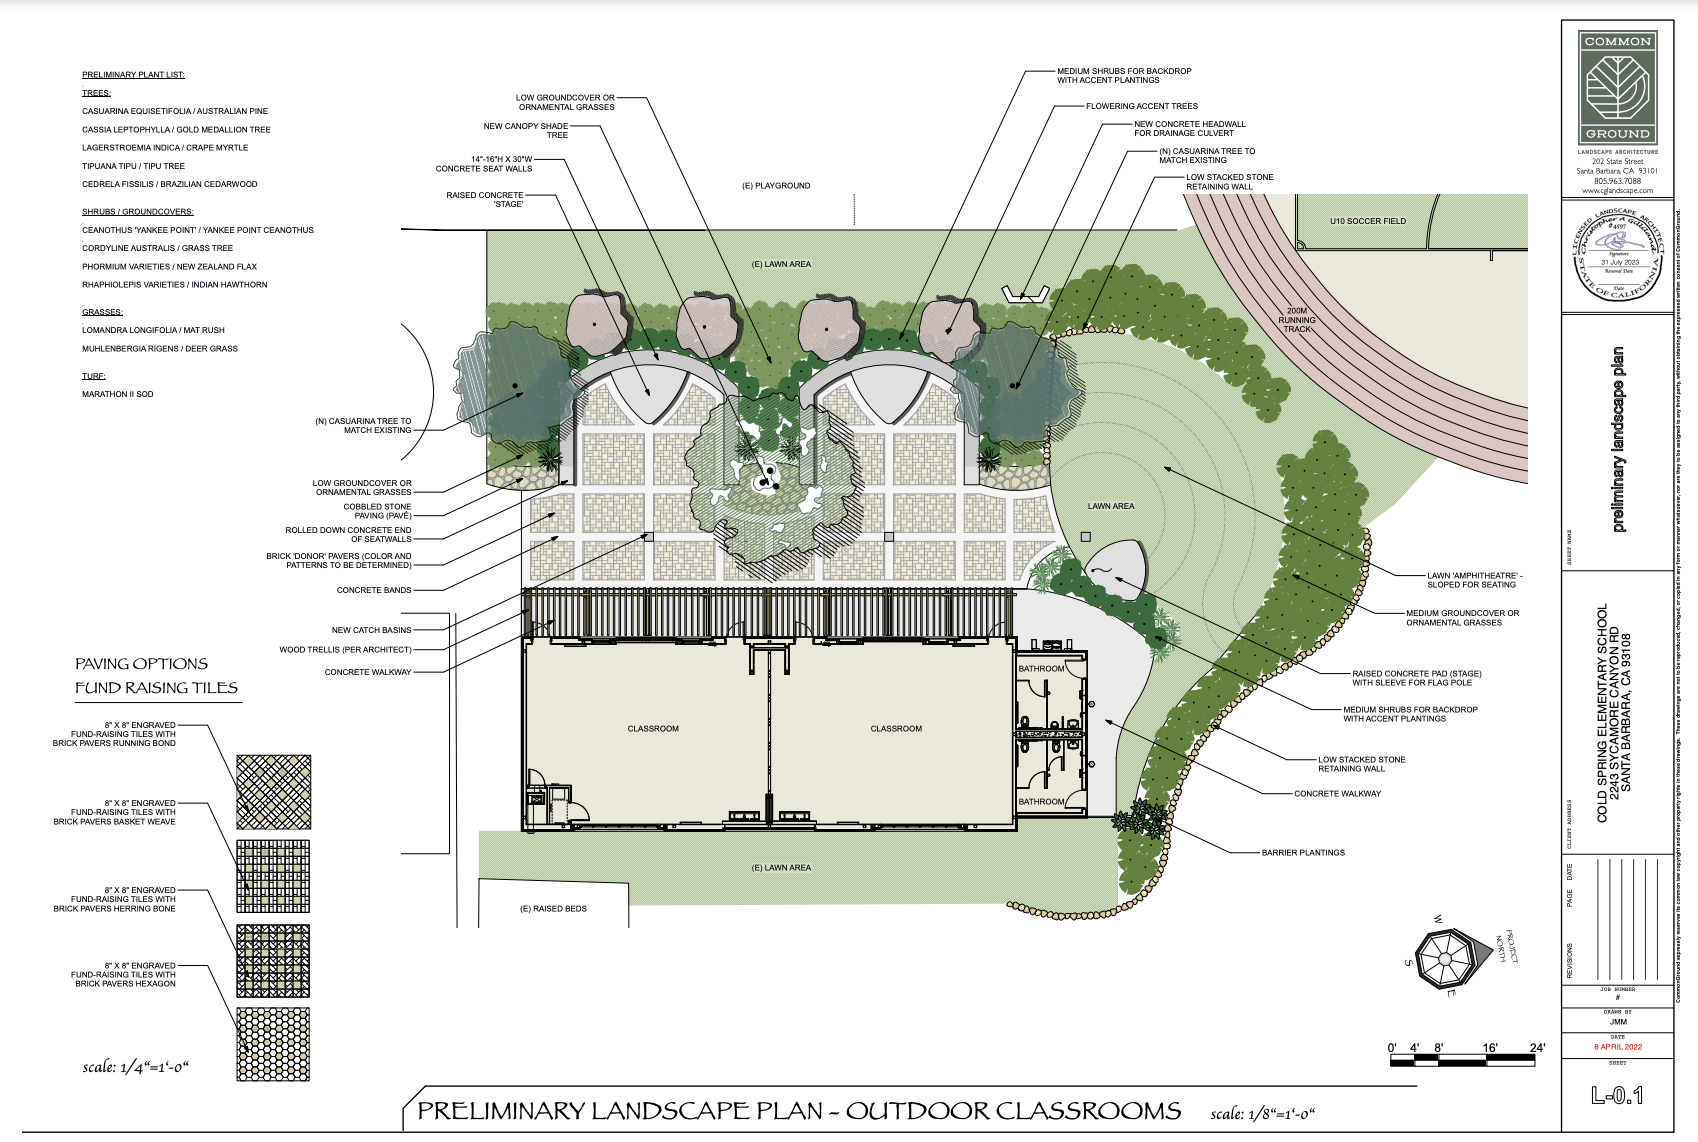 Design plan for outdoor learning area